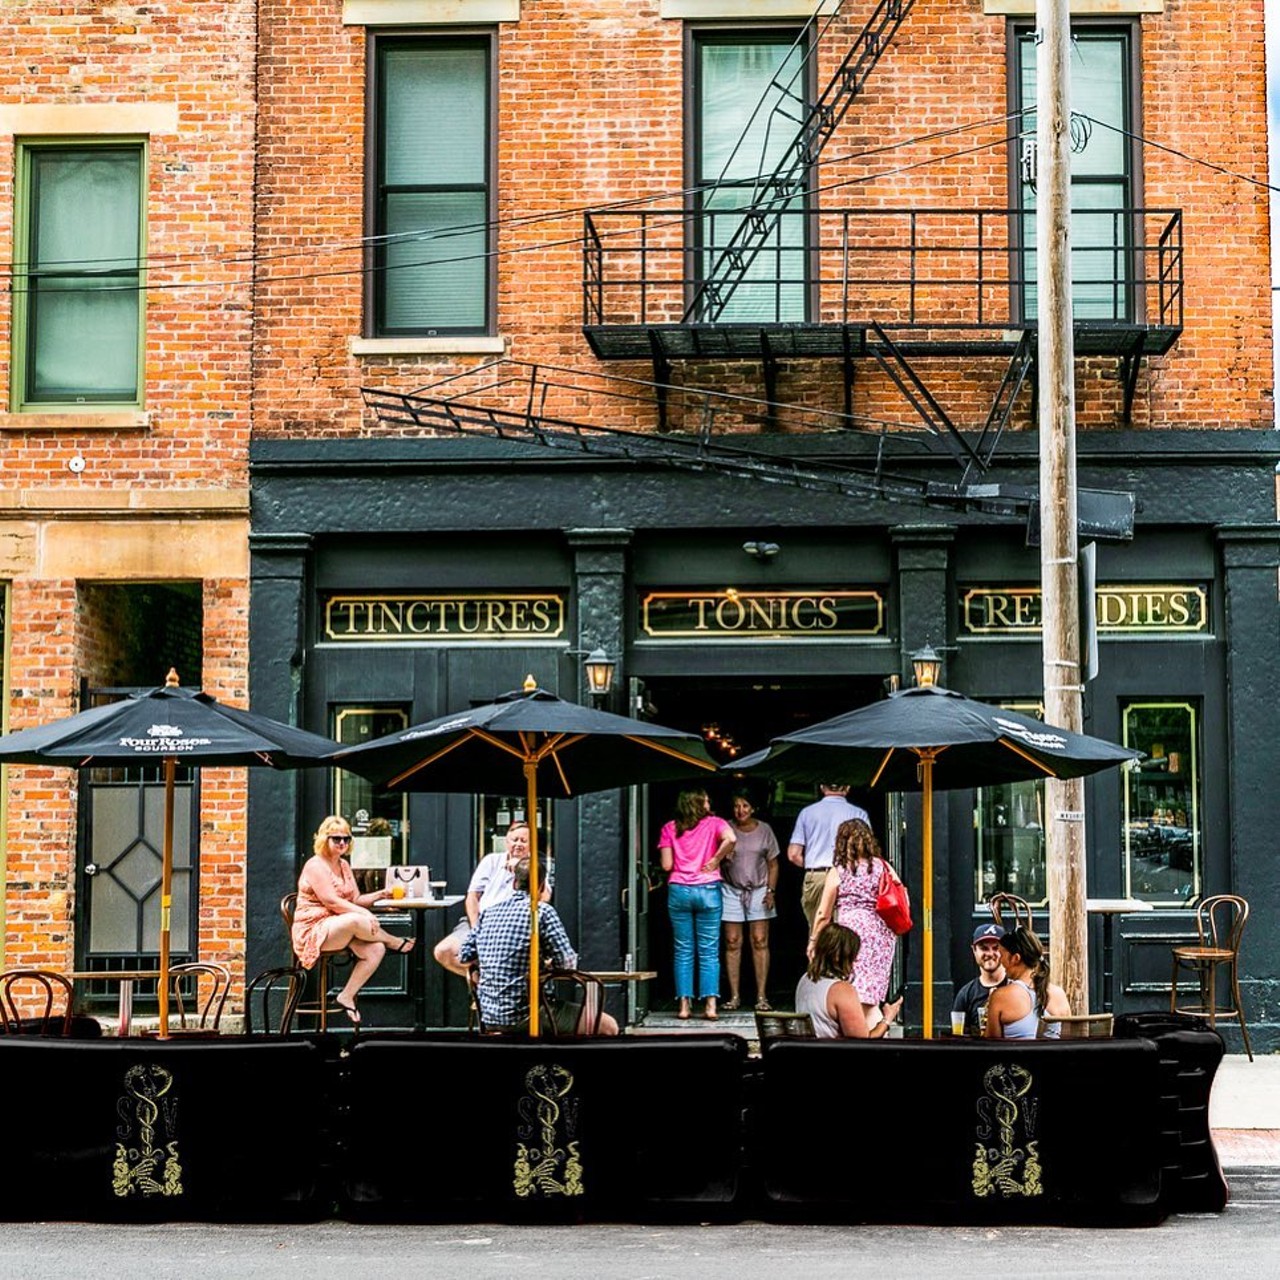 No. 10 Best Overall Bar/Club: Sundry and Vice
18 W. 13th St., Over-the-Rhine